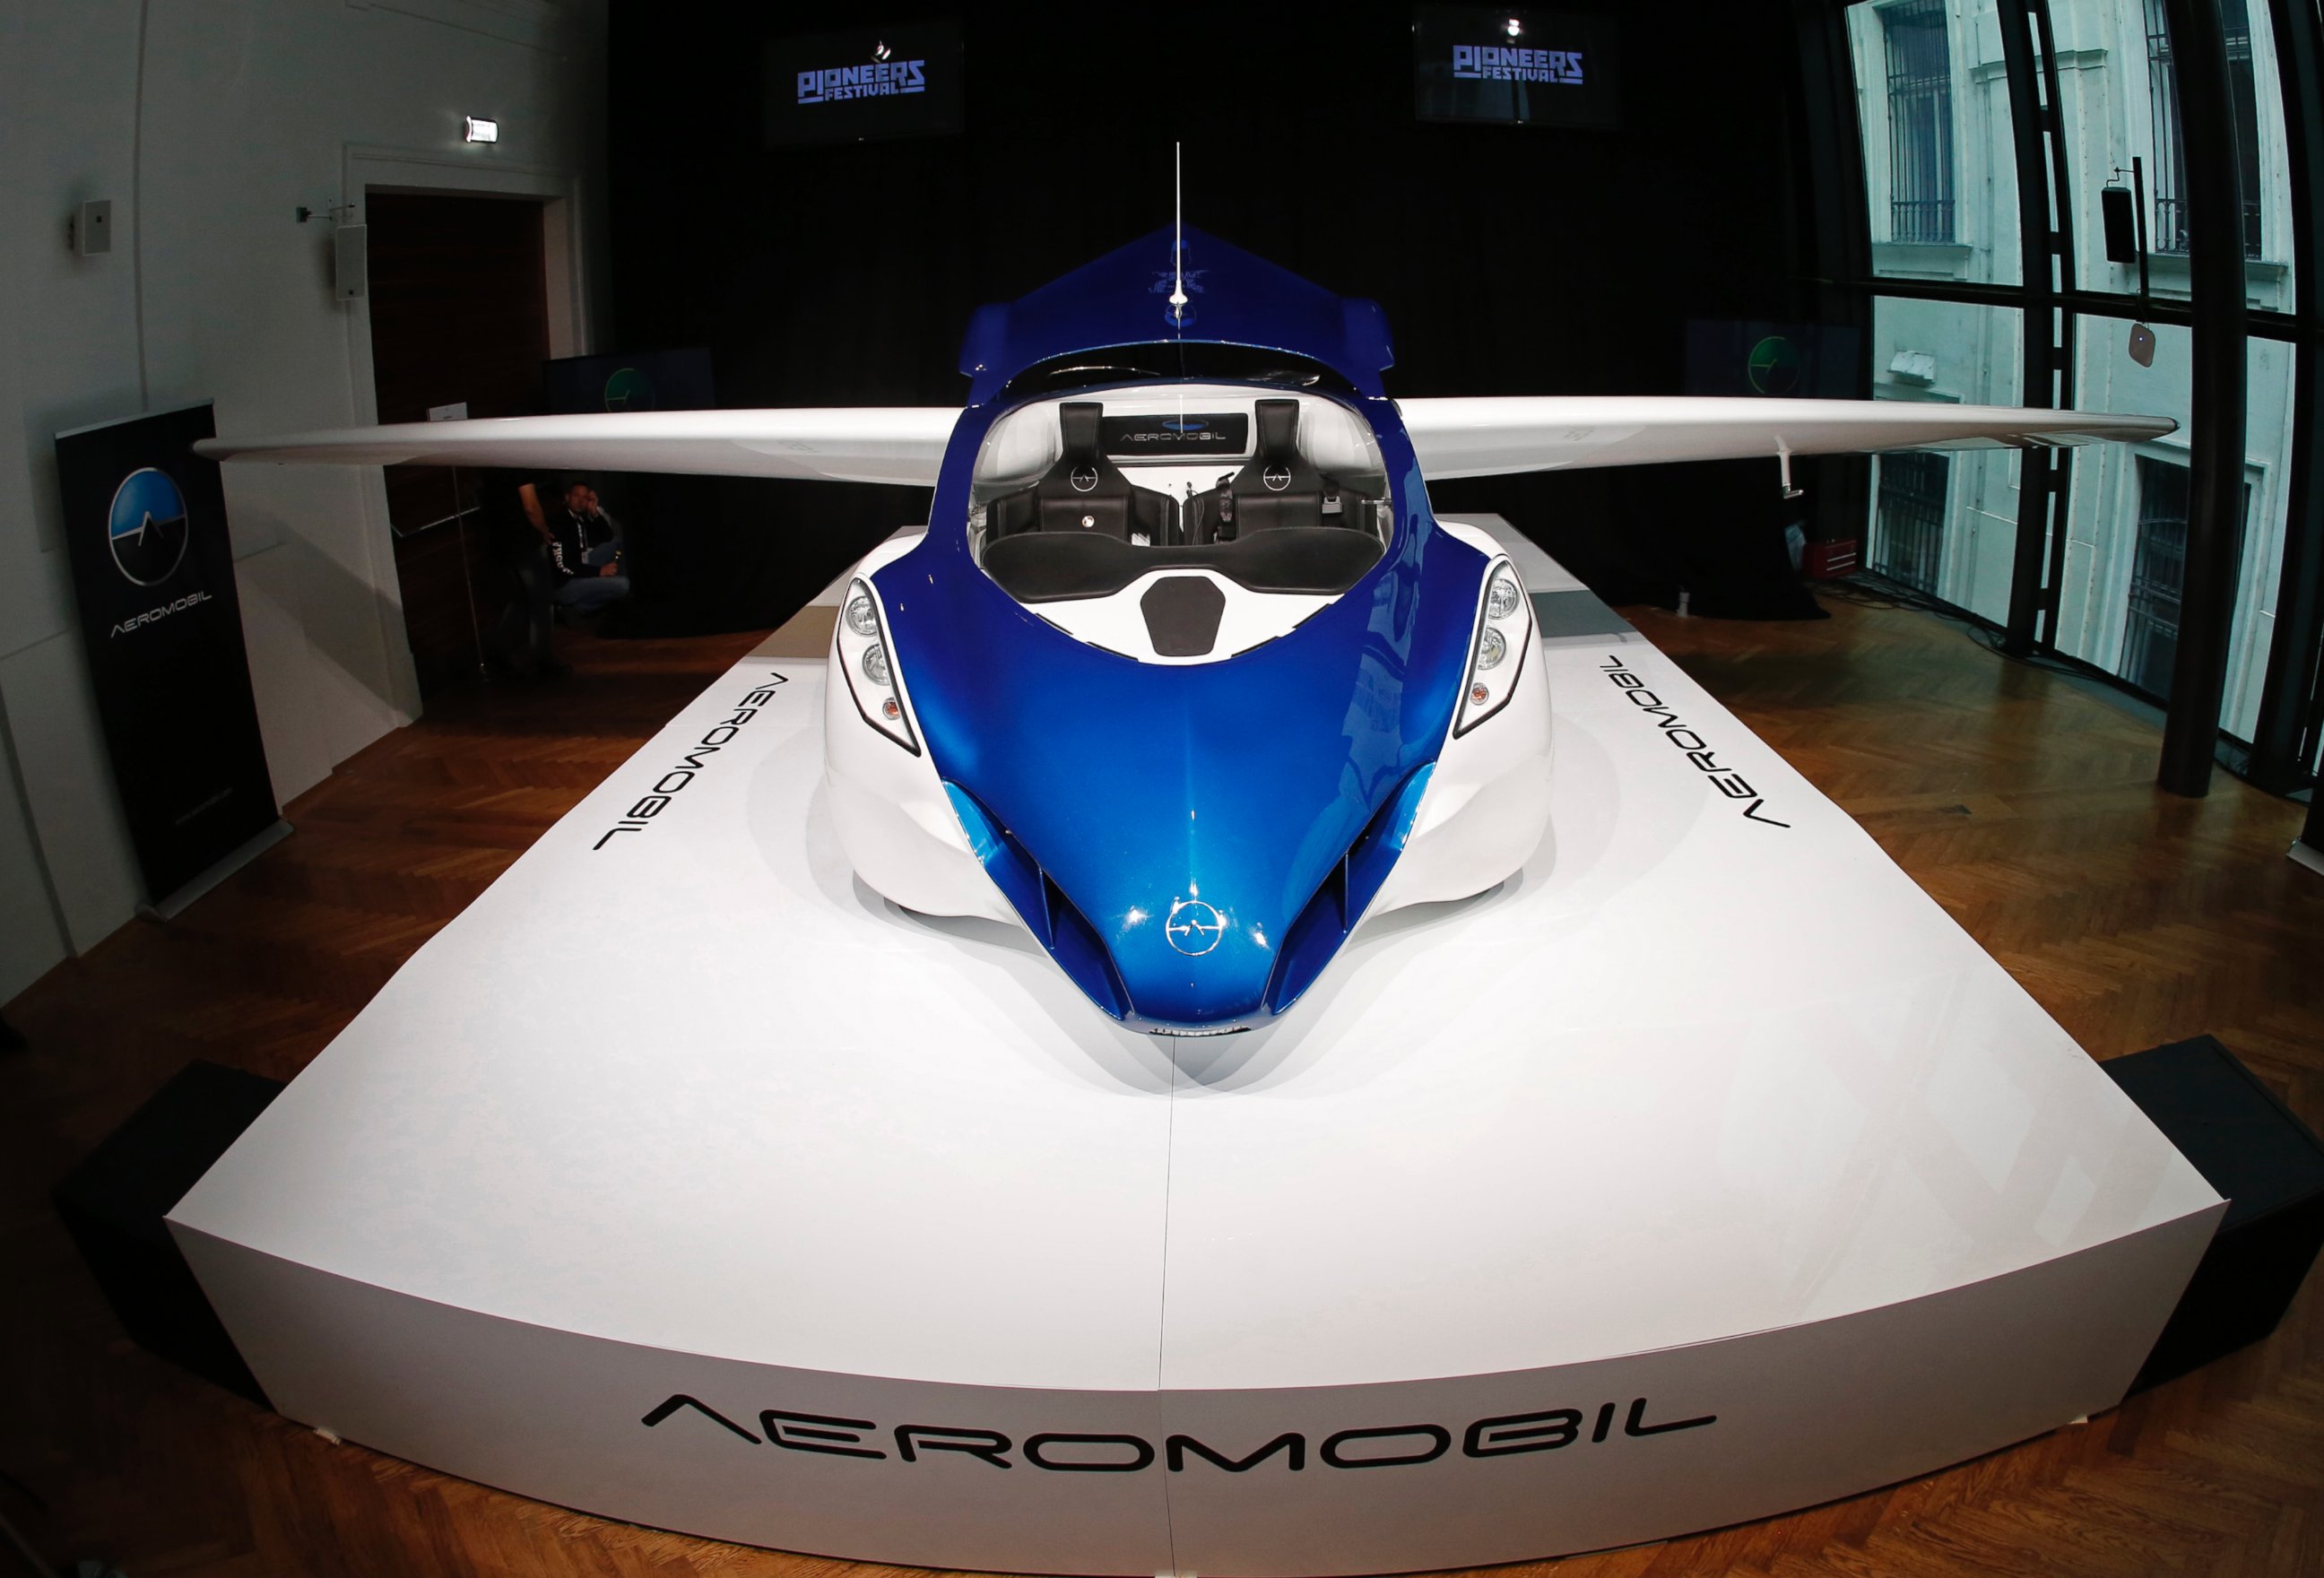 PHOTO: The AeroMobil 3.0 is pictured during its world premiere at Hofburg Palace in Vienna, Oct. 29, 2014.